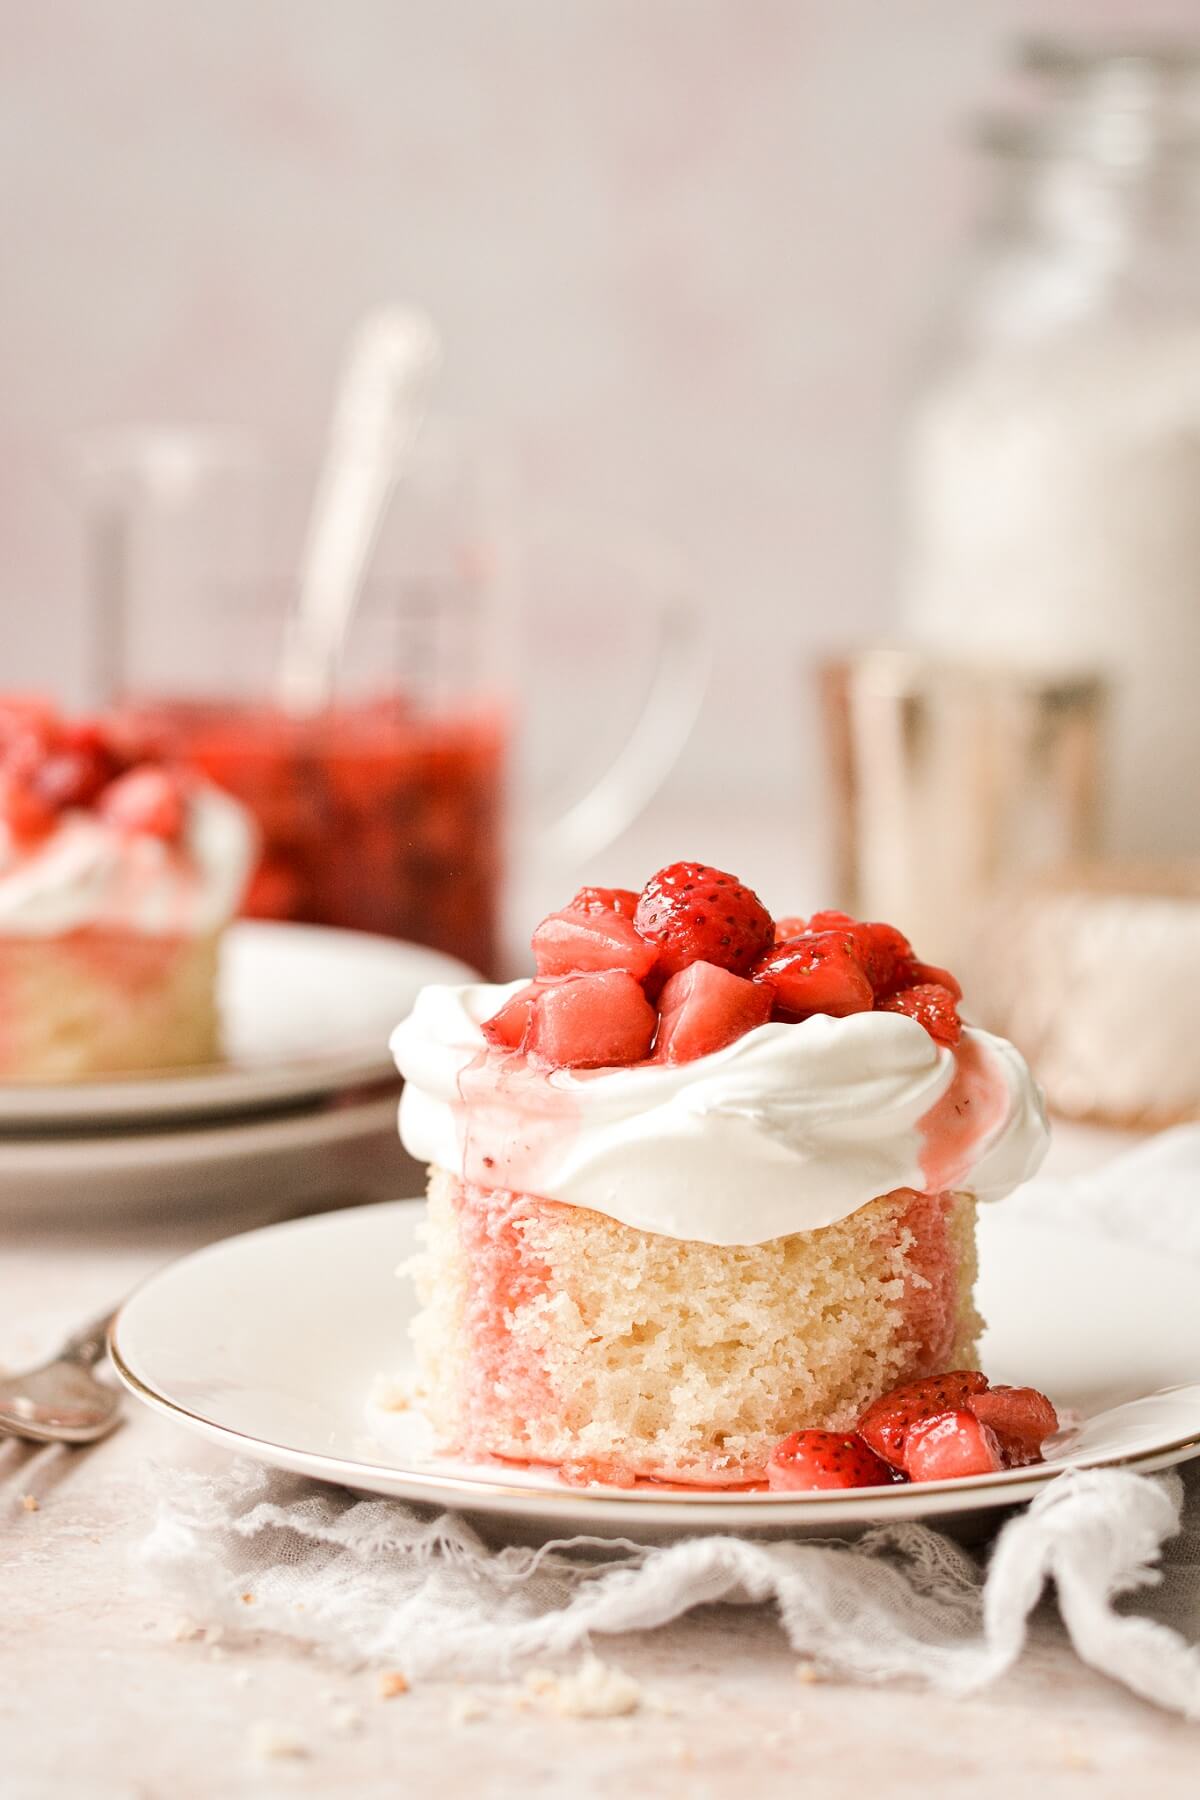 Mini strawberry shortcakes with whipped cream and strawberries.